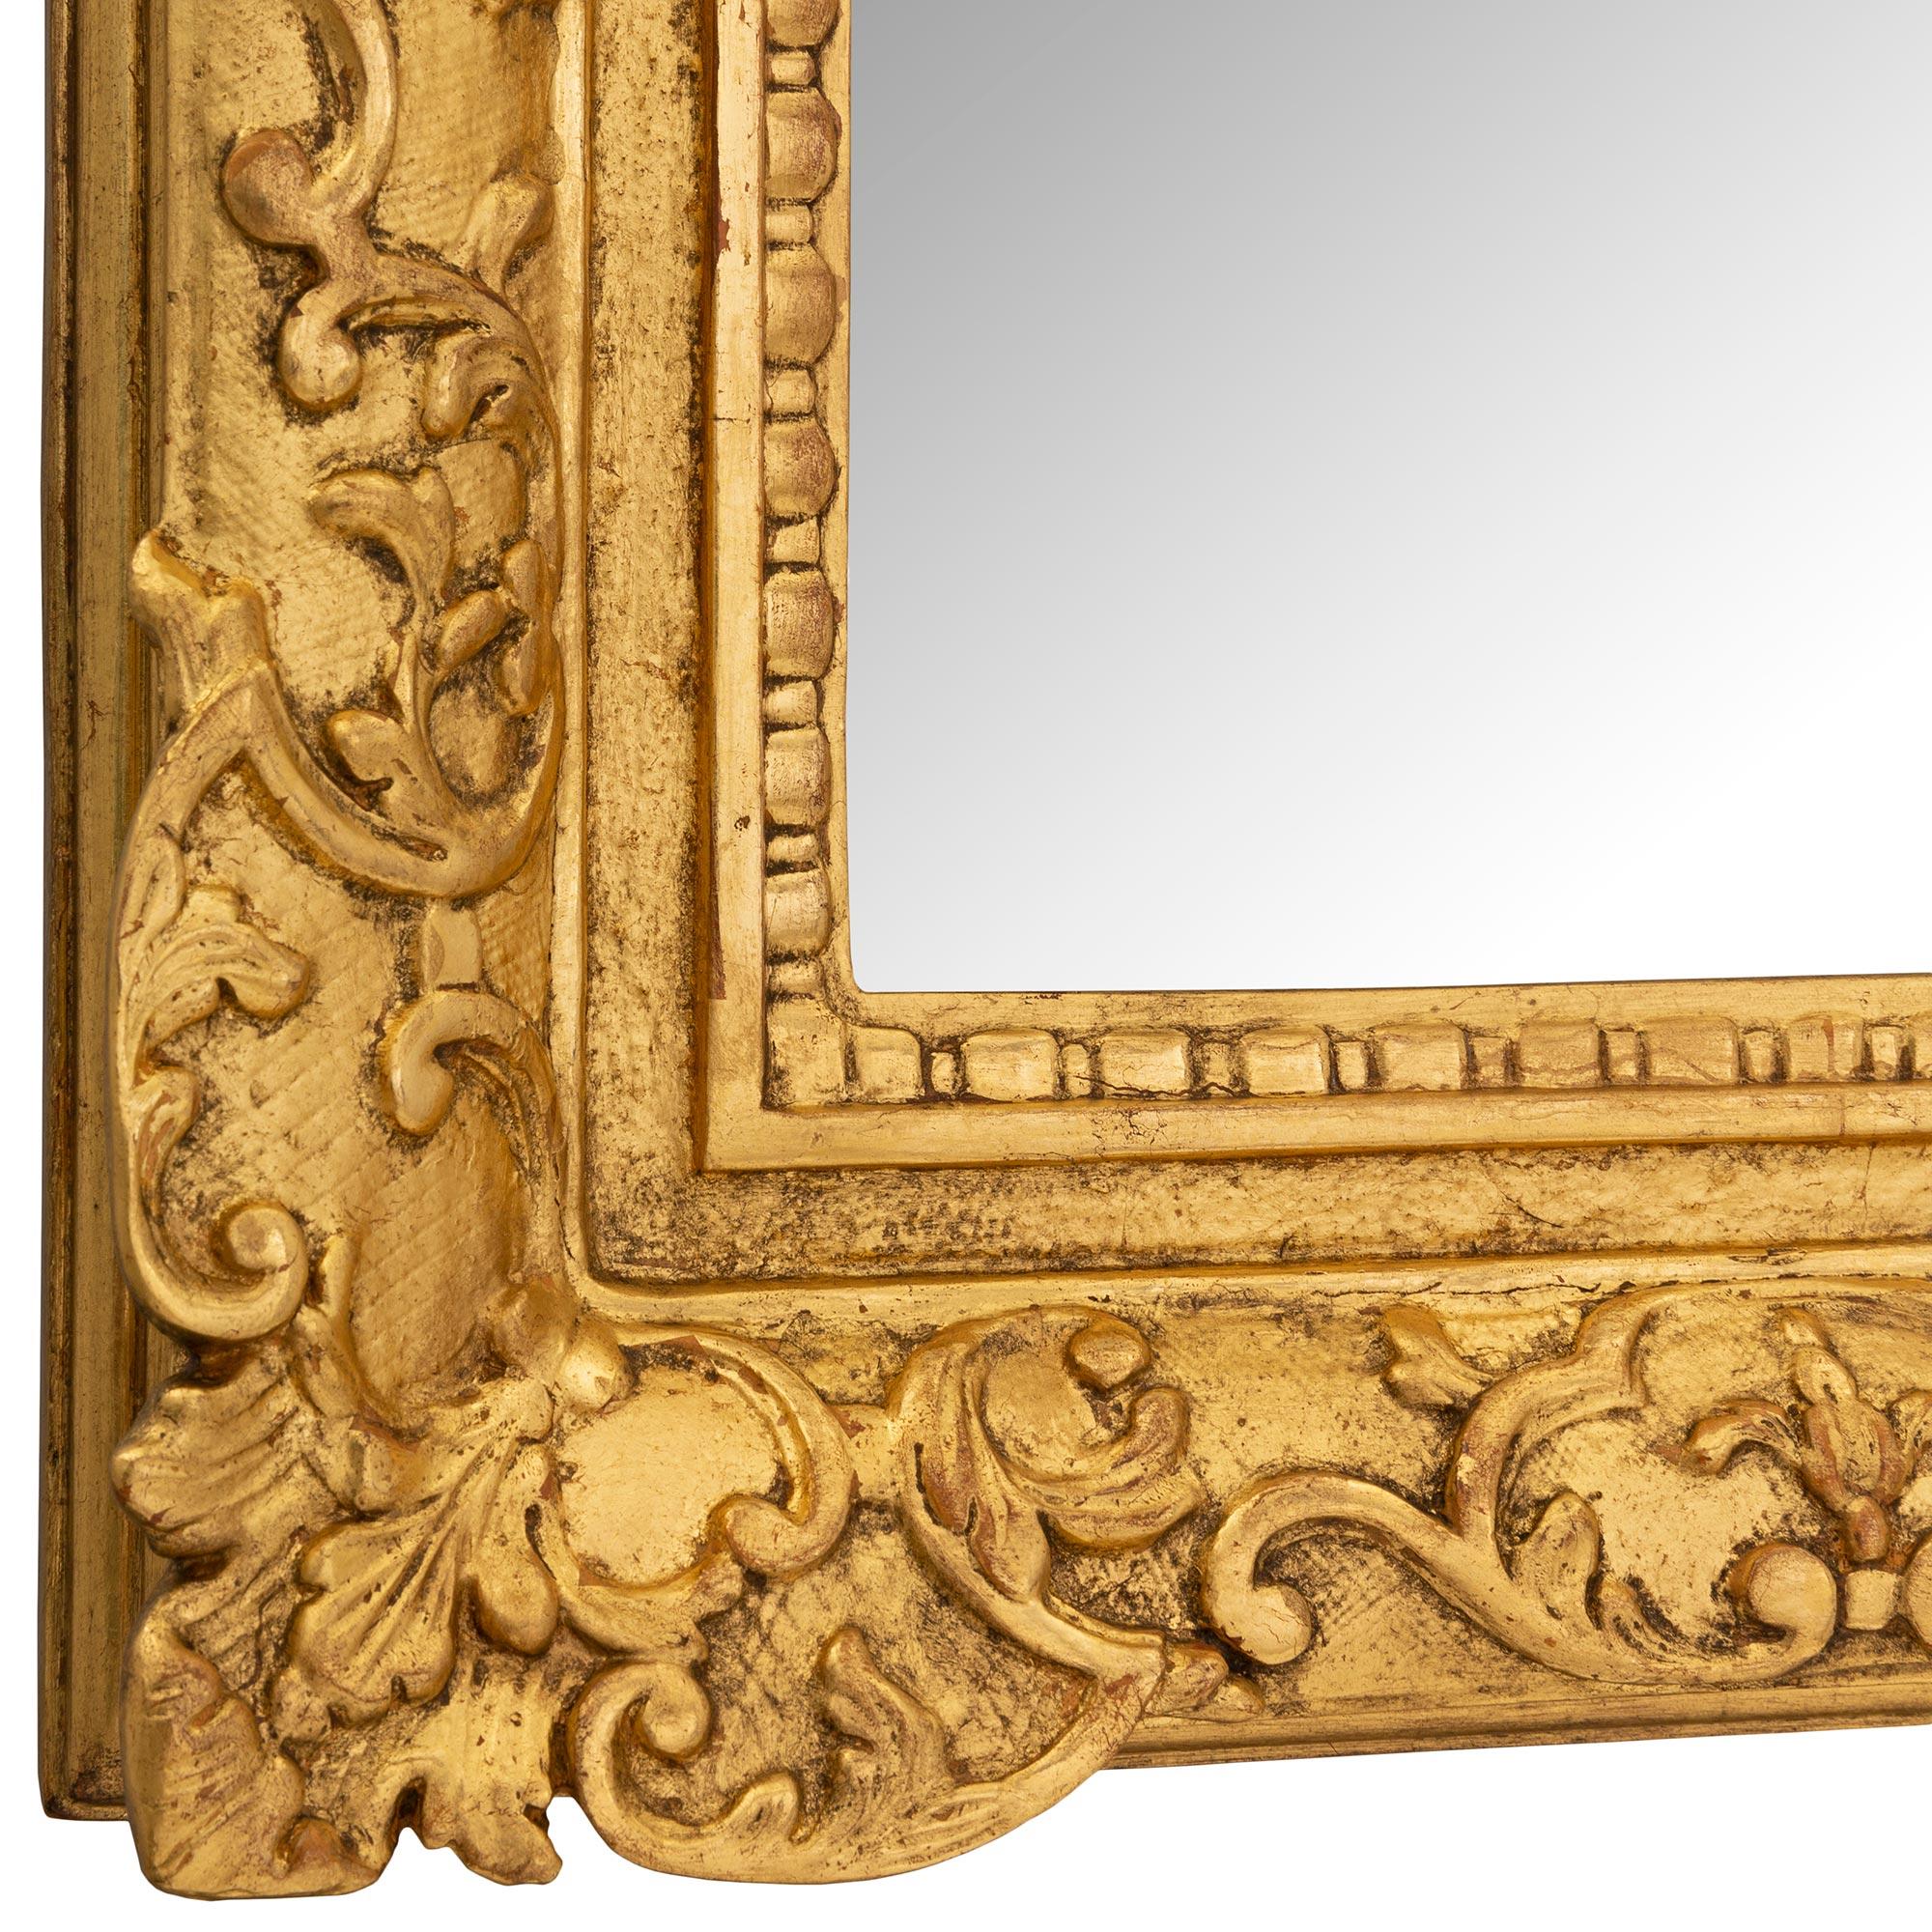 French Early 18th Century Régence Period Giltwood and Mecca Mirror For Sale 3